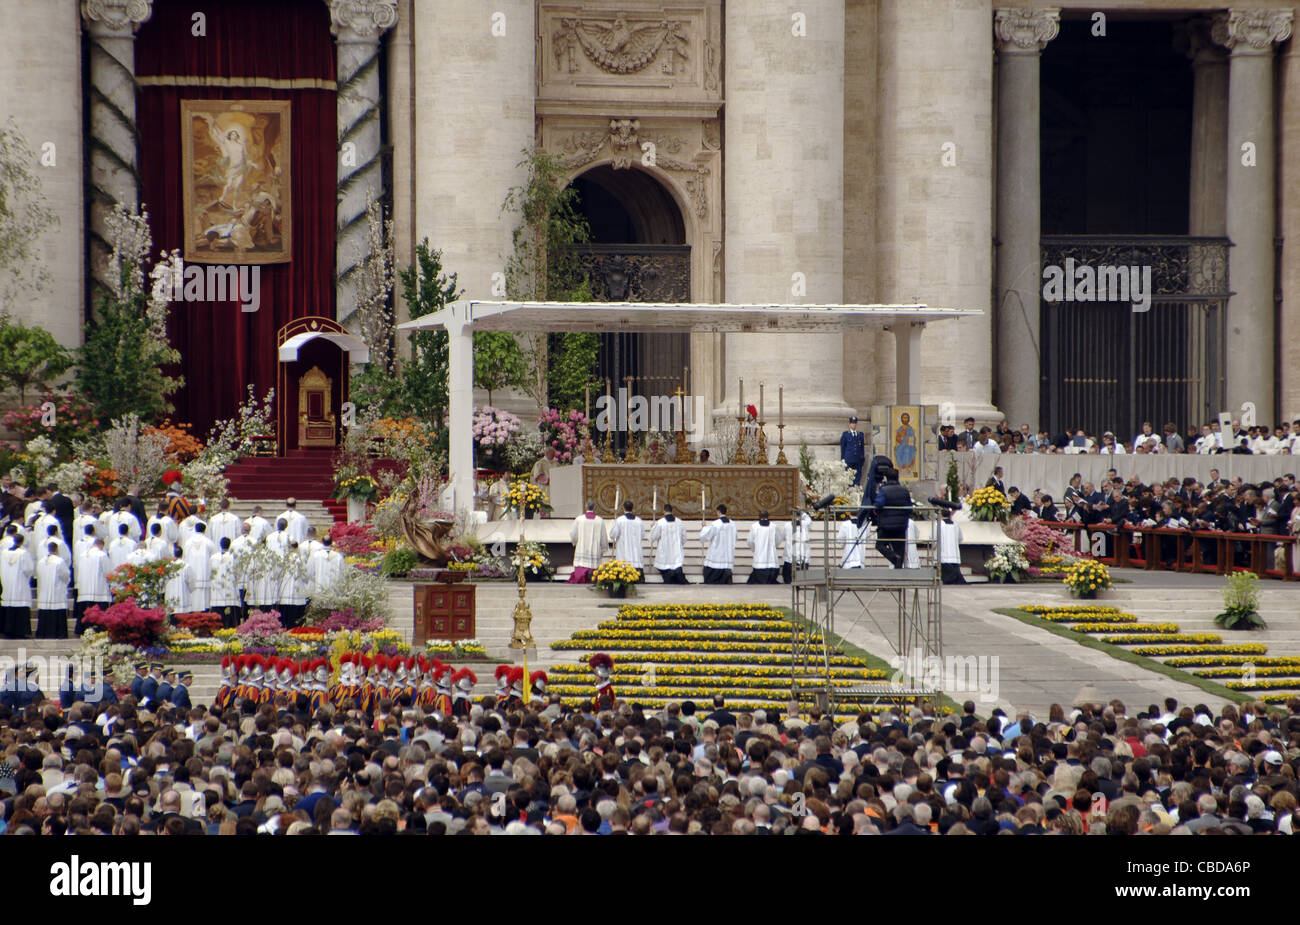 Mass of Pope Benedict XVI in Holy Week. Saint Peter's Square. Vatican City. Stock Photo